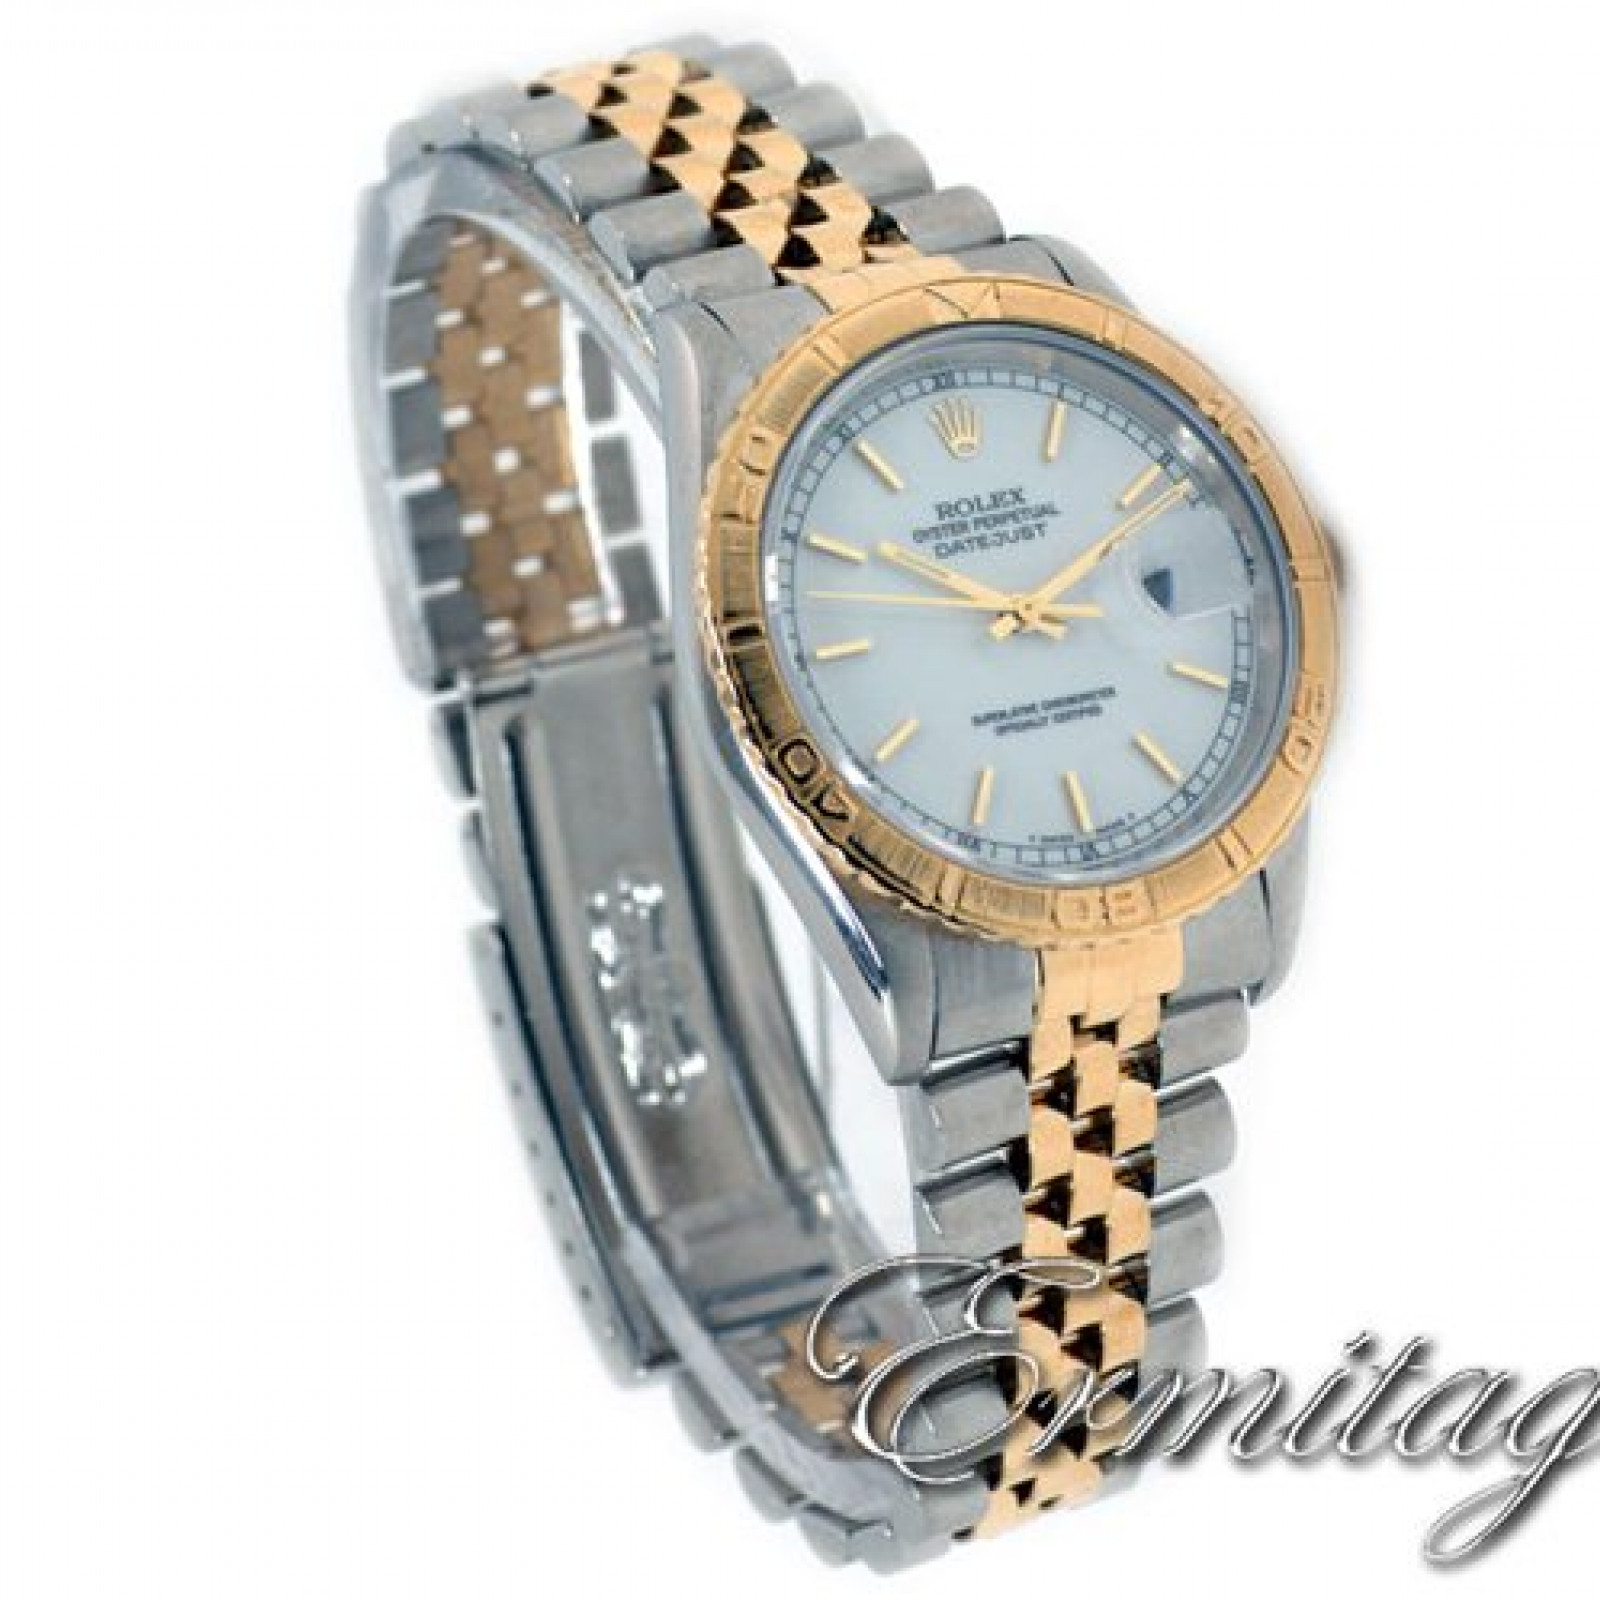 Rolex Datejust Turn-O-Graph 16263 60 Minutes Elapsed Time Rotatable